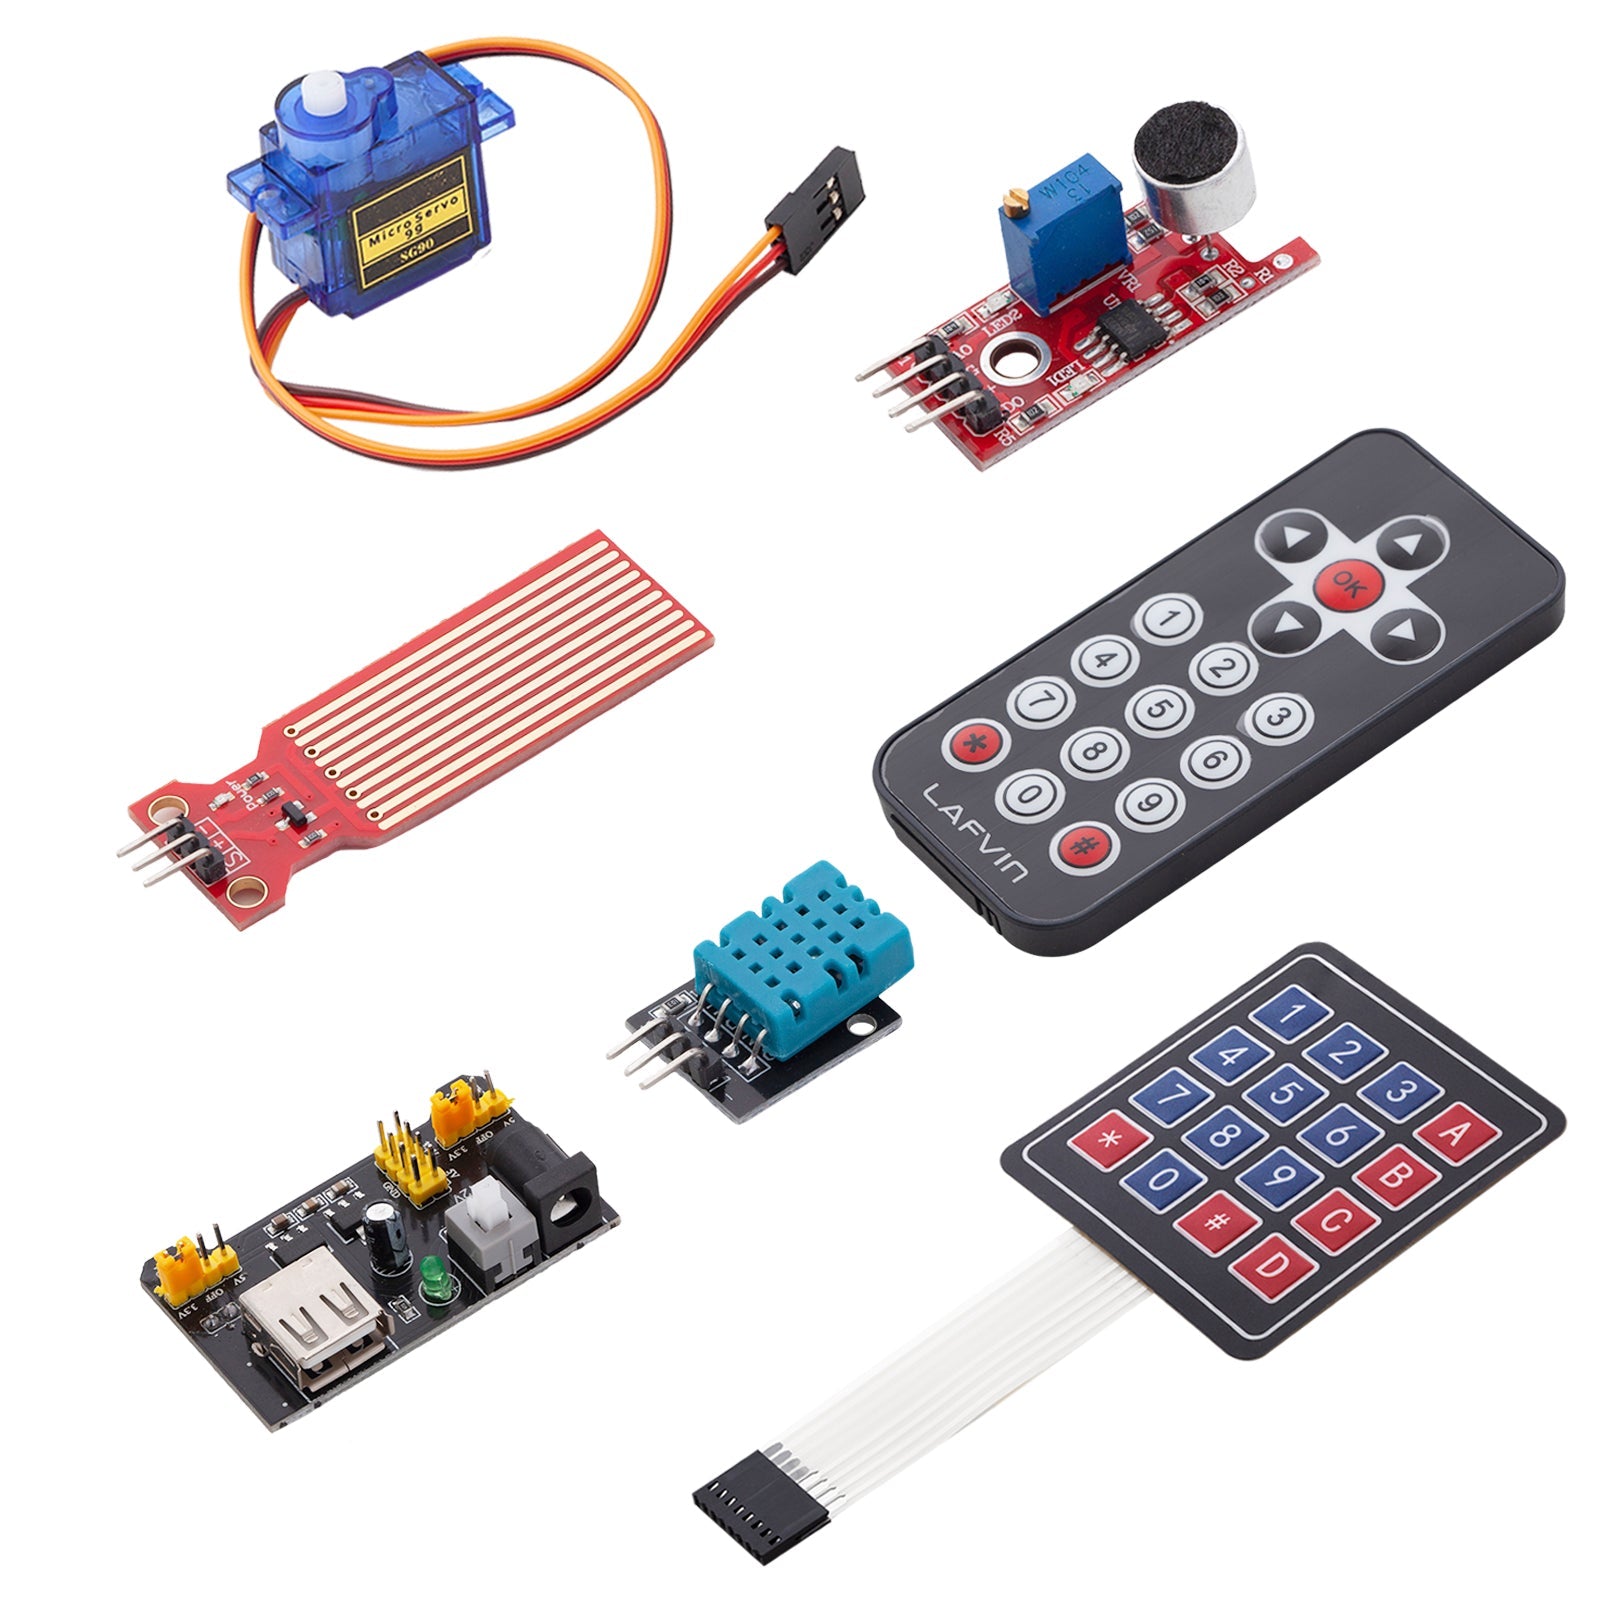 Starter kit electronics compatible with Arduino - microcontroller